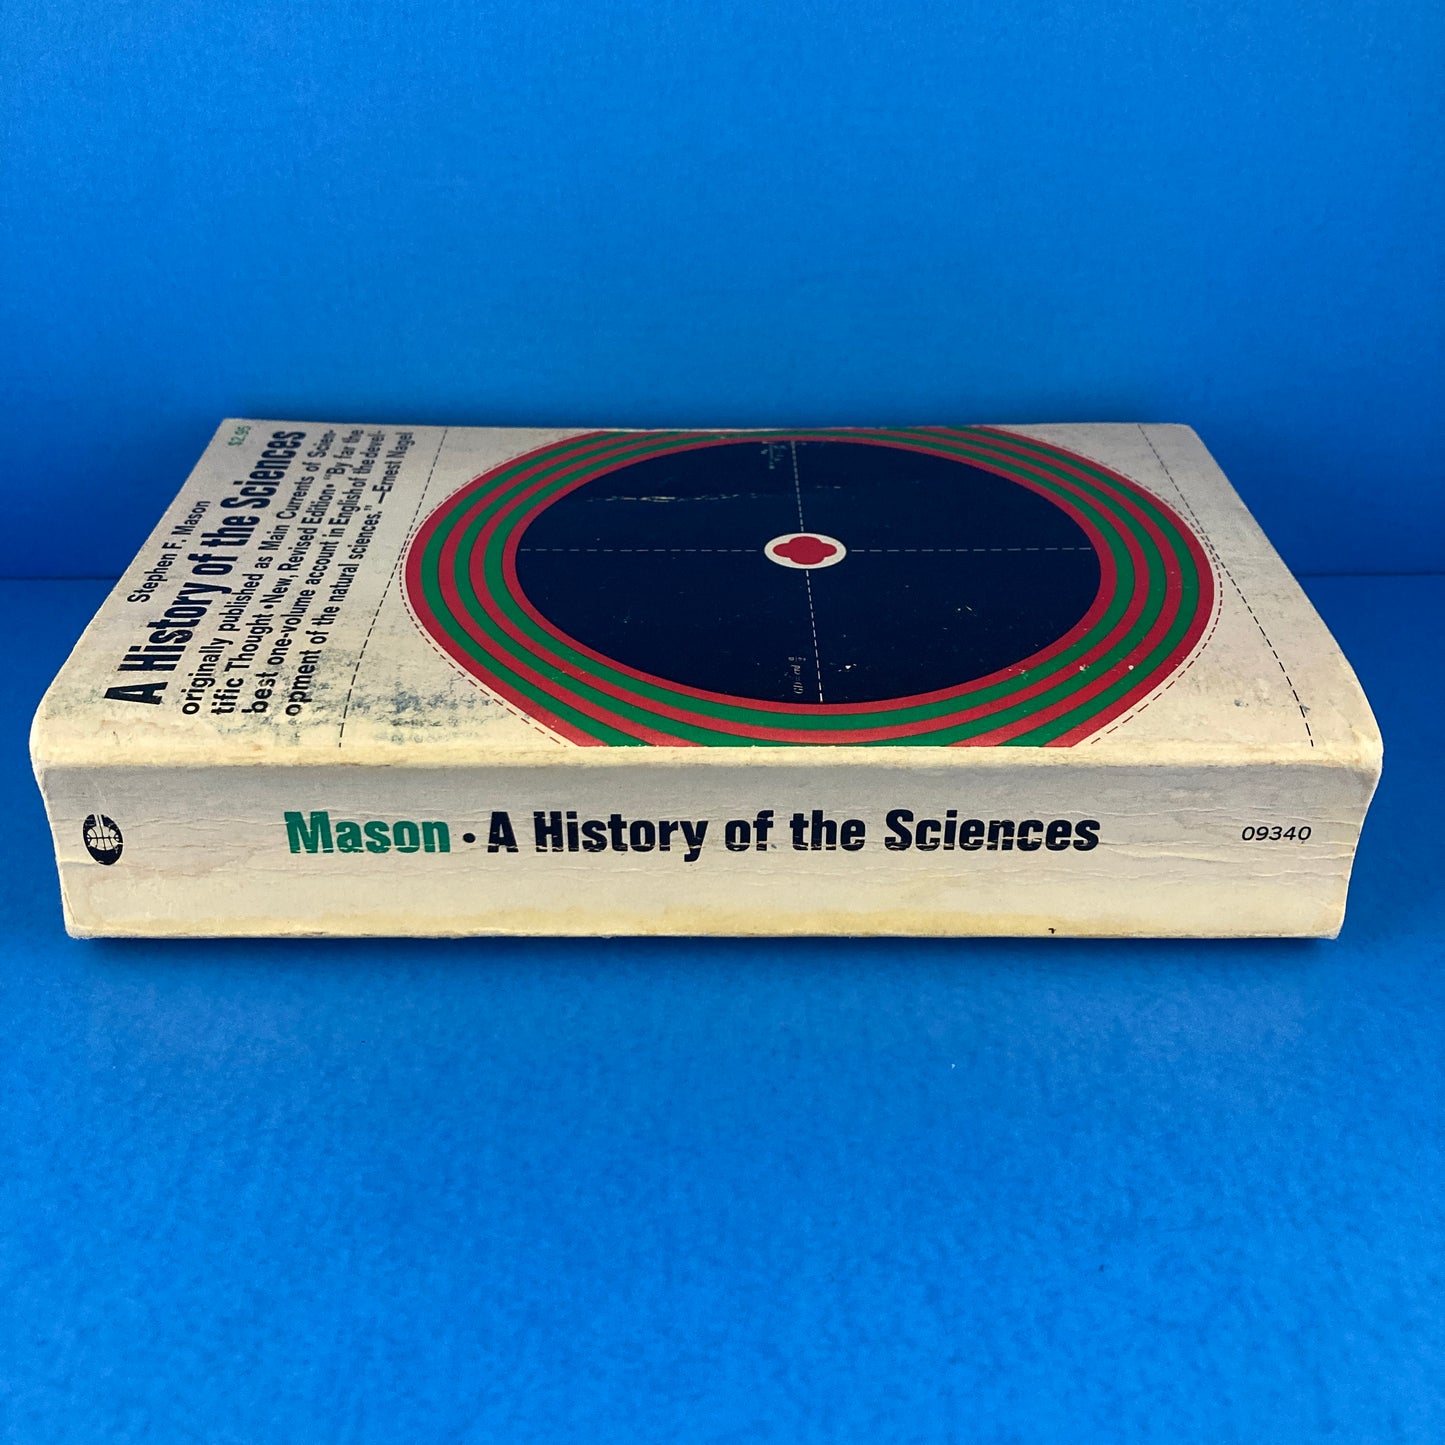 A History of the Sciences